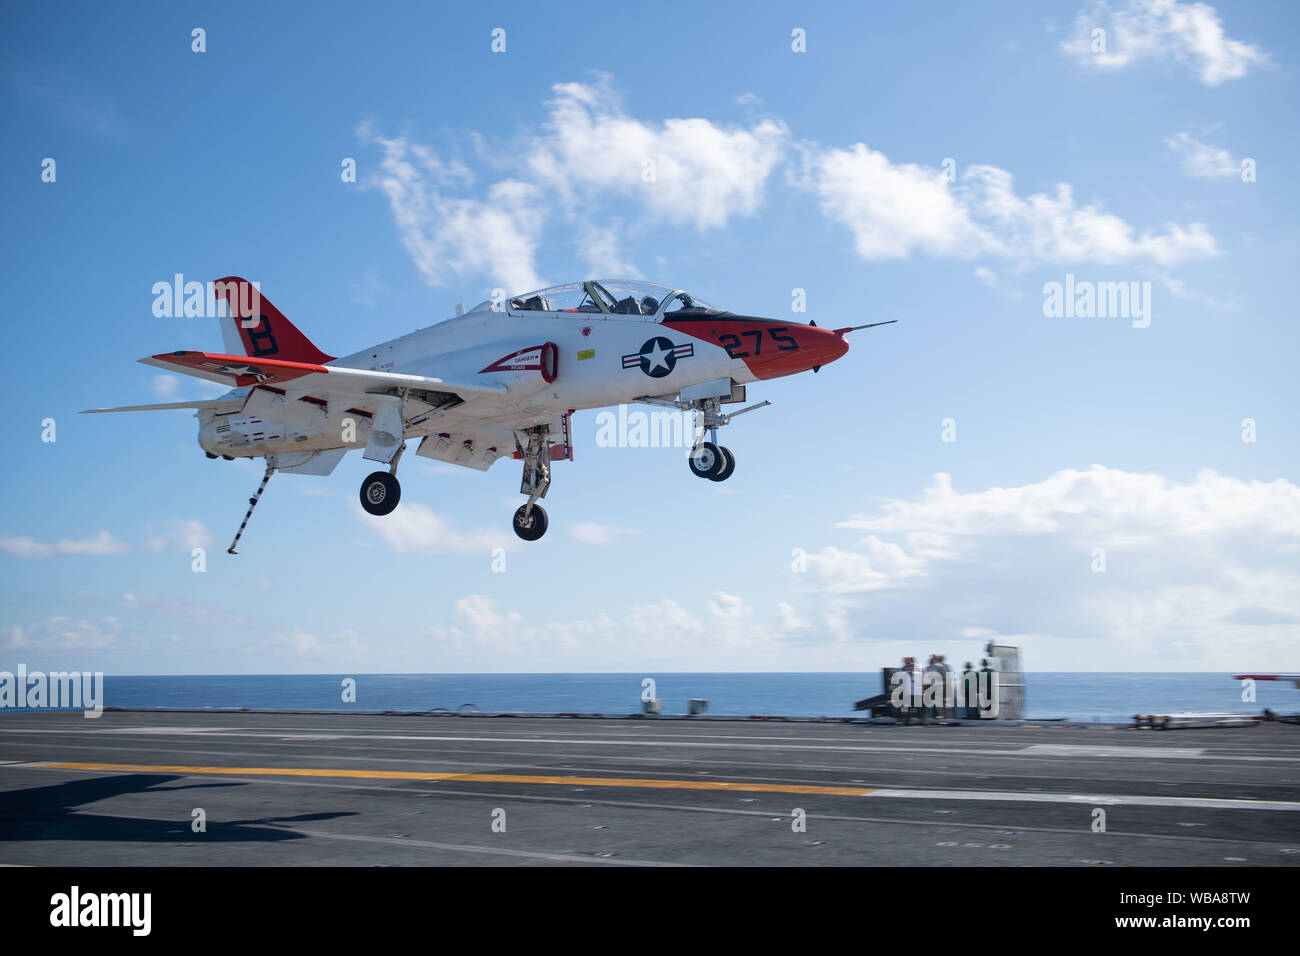 A T-45C Goshawk training aircraft, assigned to Training Air Wing (TW) 2, prepares to land on the flight deck of the aircraft carrier USS John C. Stennis (CVN 74) in the Atlantic Ocean, Aug. 23, 2019.  The John C. Stennis is underway conducting carrier qualifications in support of Chief of Naval Air Training Command. (U.S. Navy photo by Mass Communication Specialist 3rd Class Skyler Okerman) Stock Photo